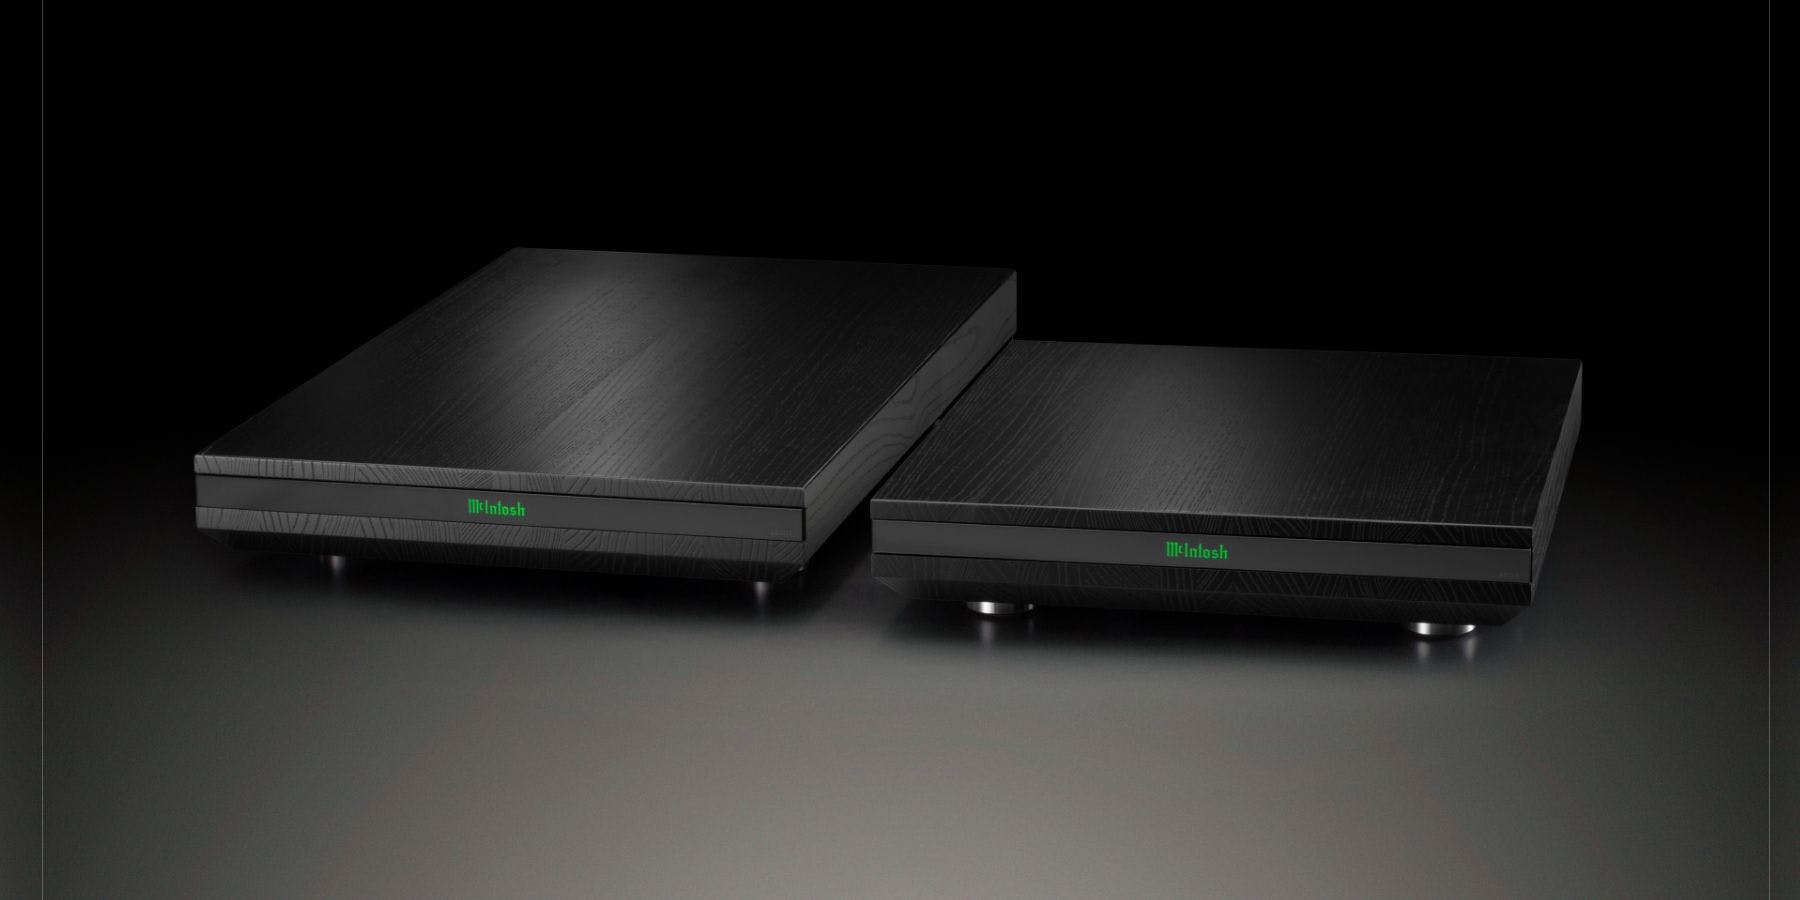 Stands that deliver: McIntosh launches dedicated stands for its highest-performance amplifiers